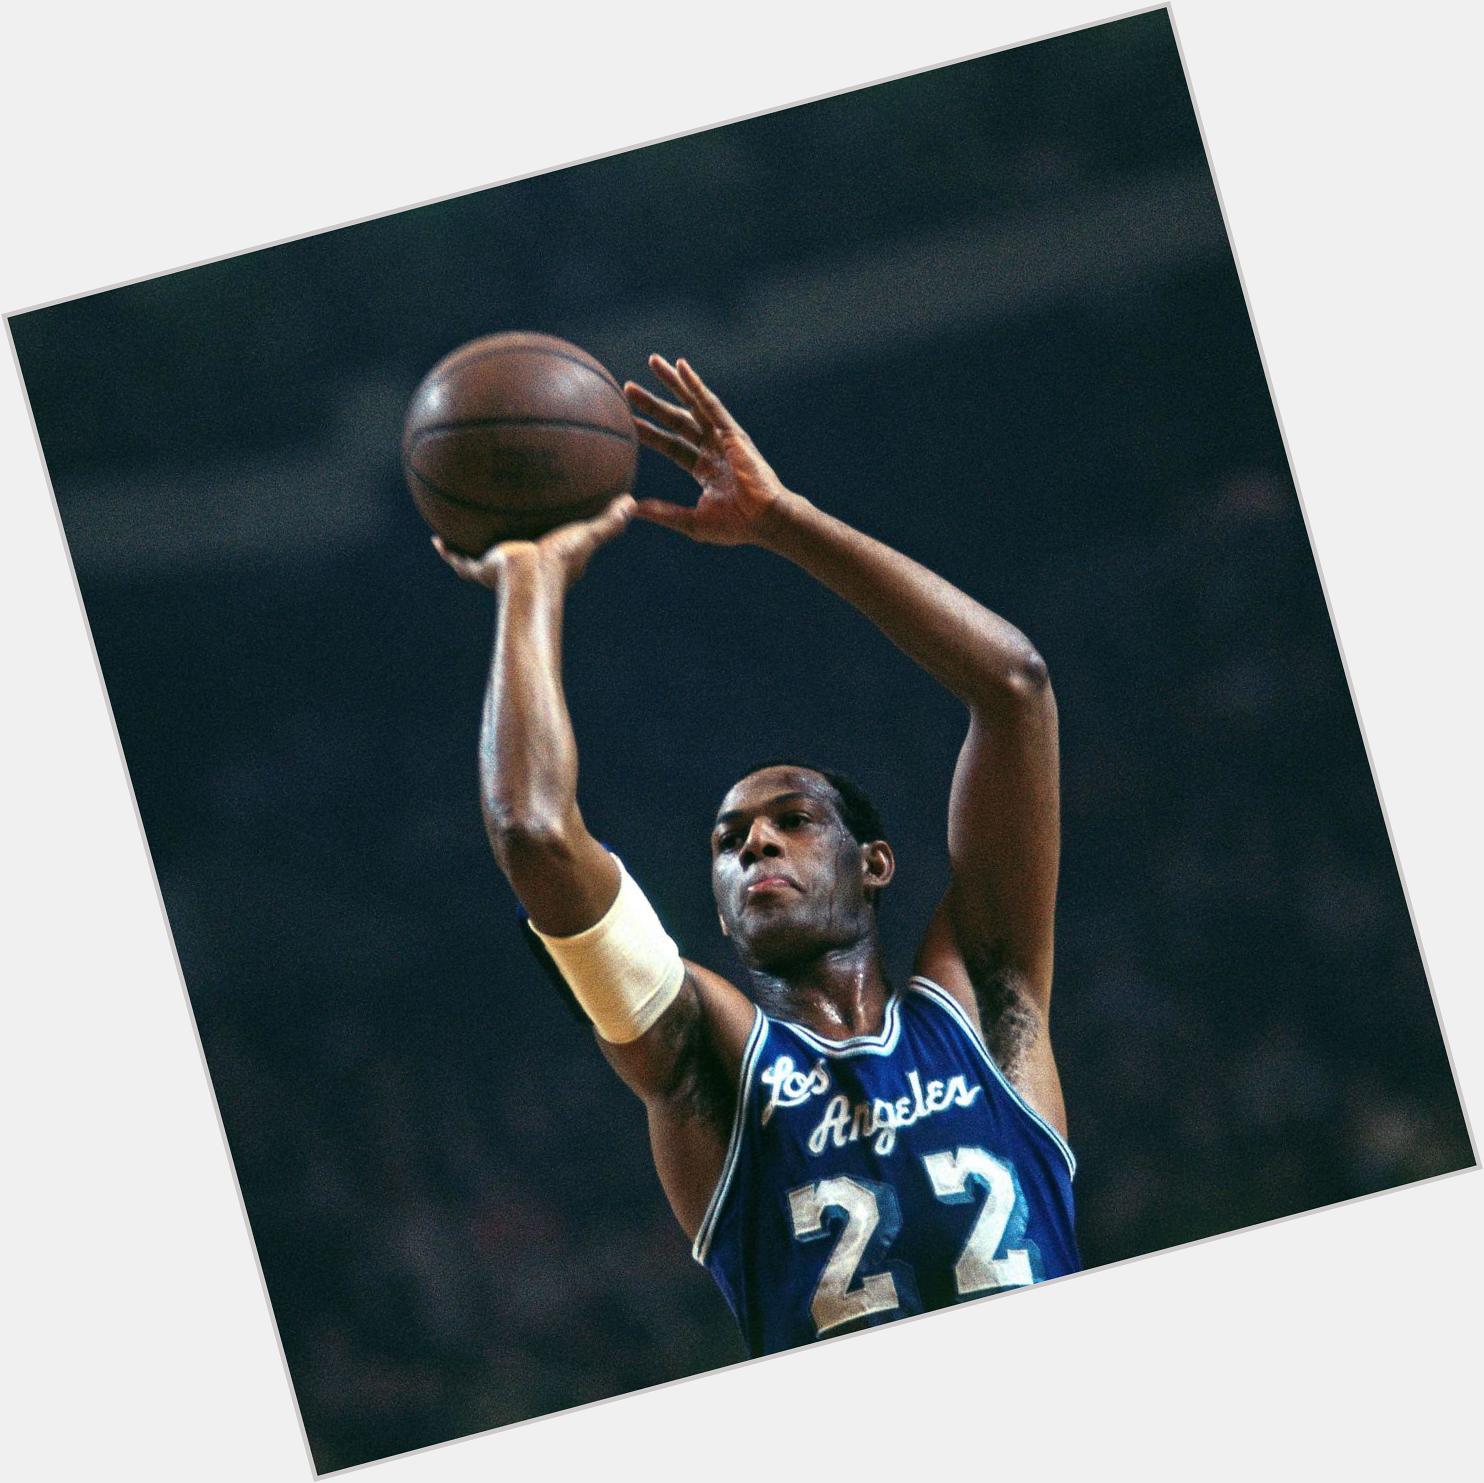 Happy Birthday to 11-time All-Star Elgin Baylor! The legend turns 81 today. 